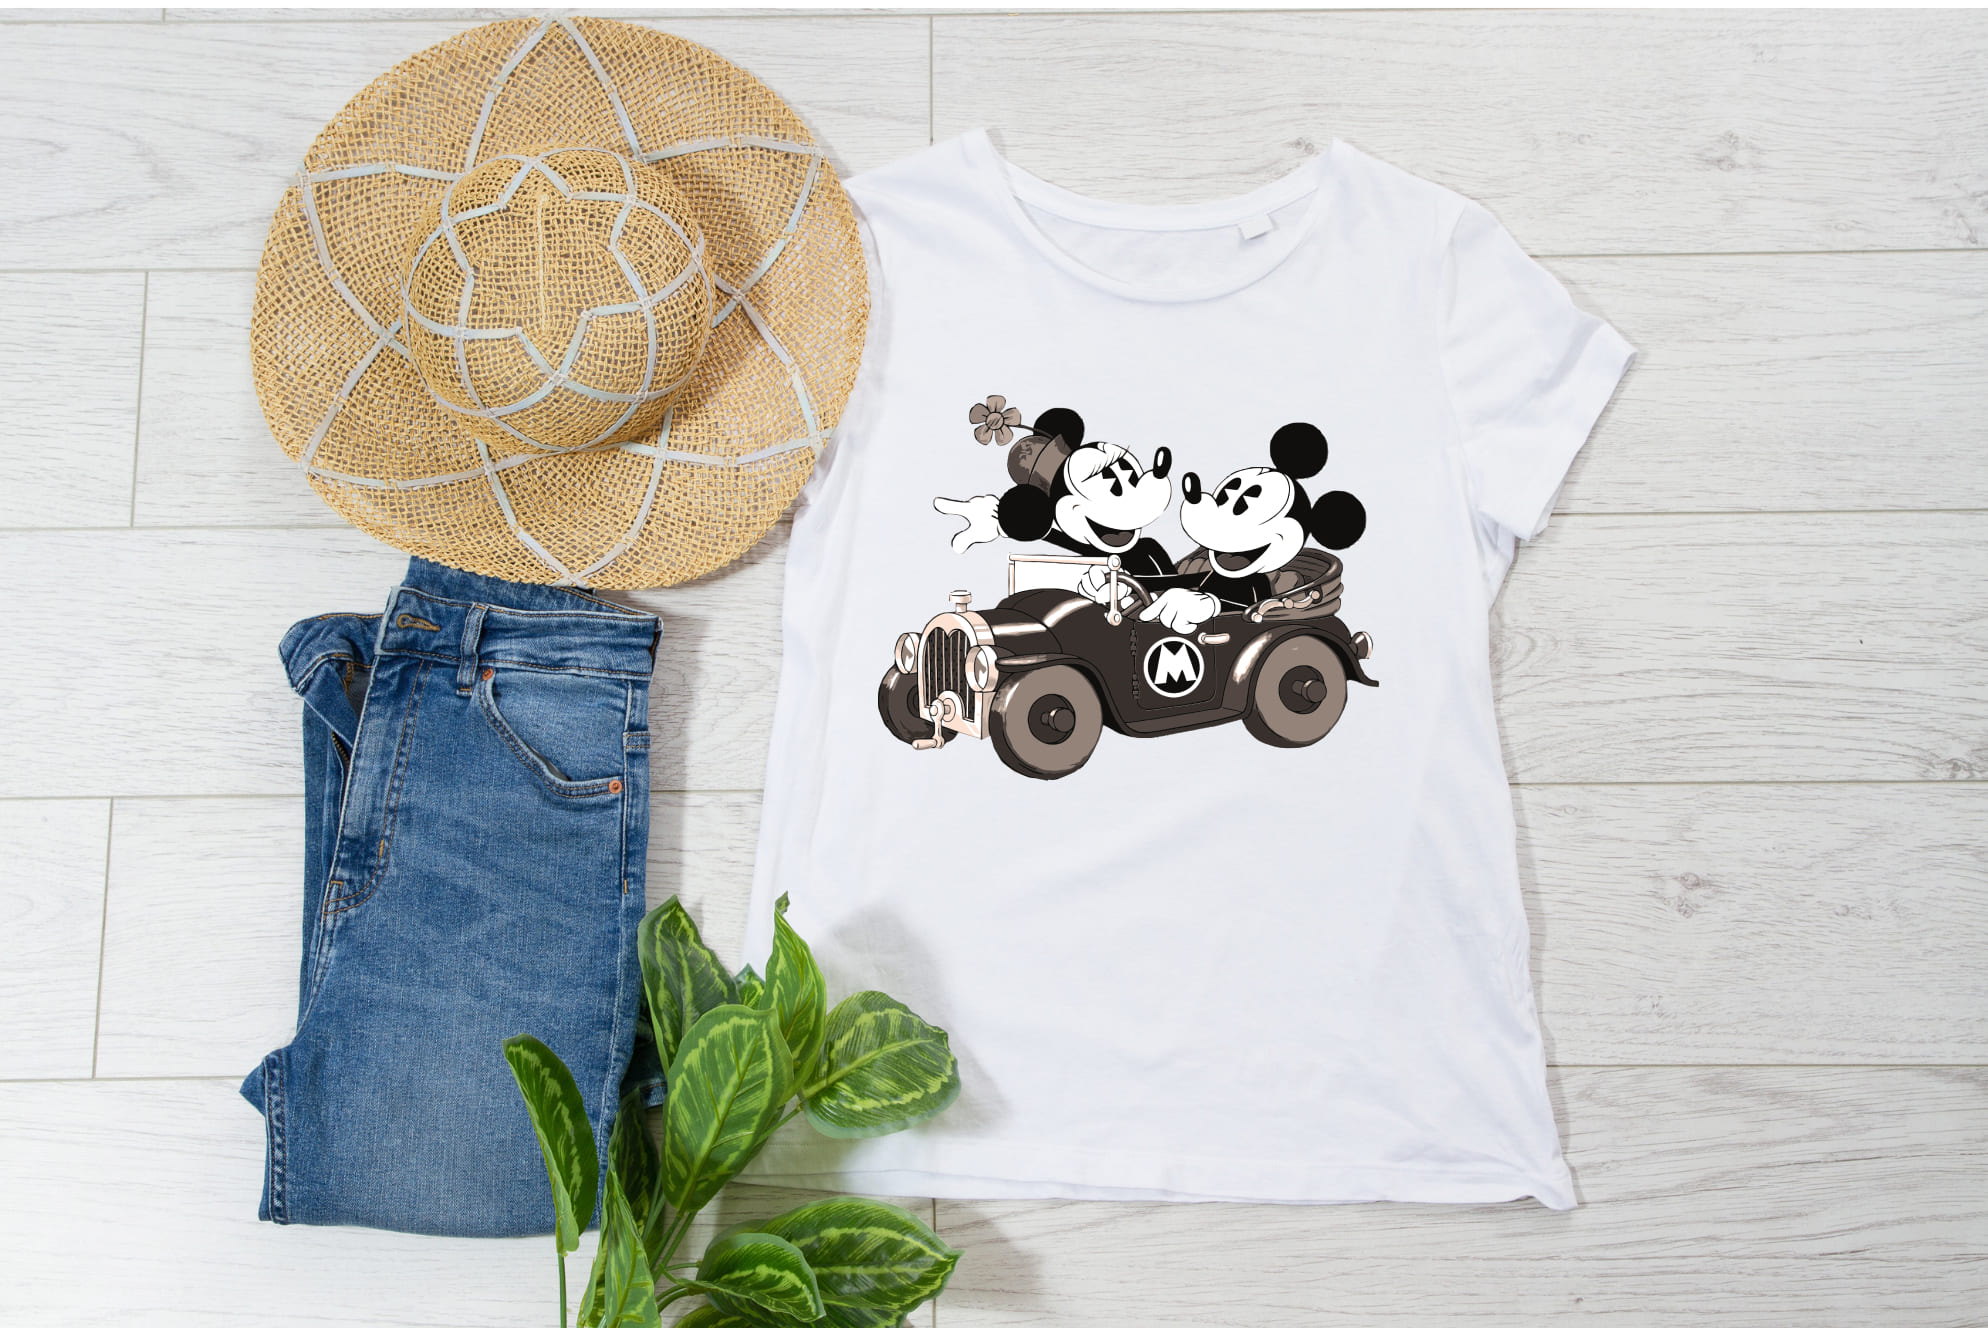 Mickey mouse for the car on the white t-shirt.